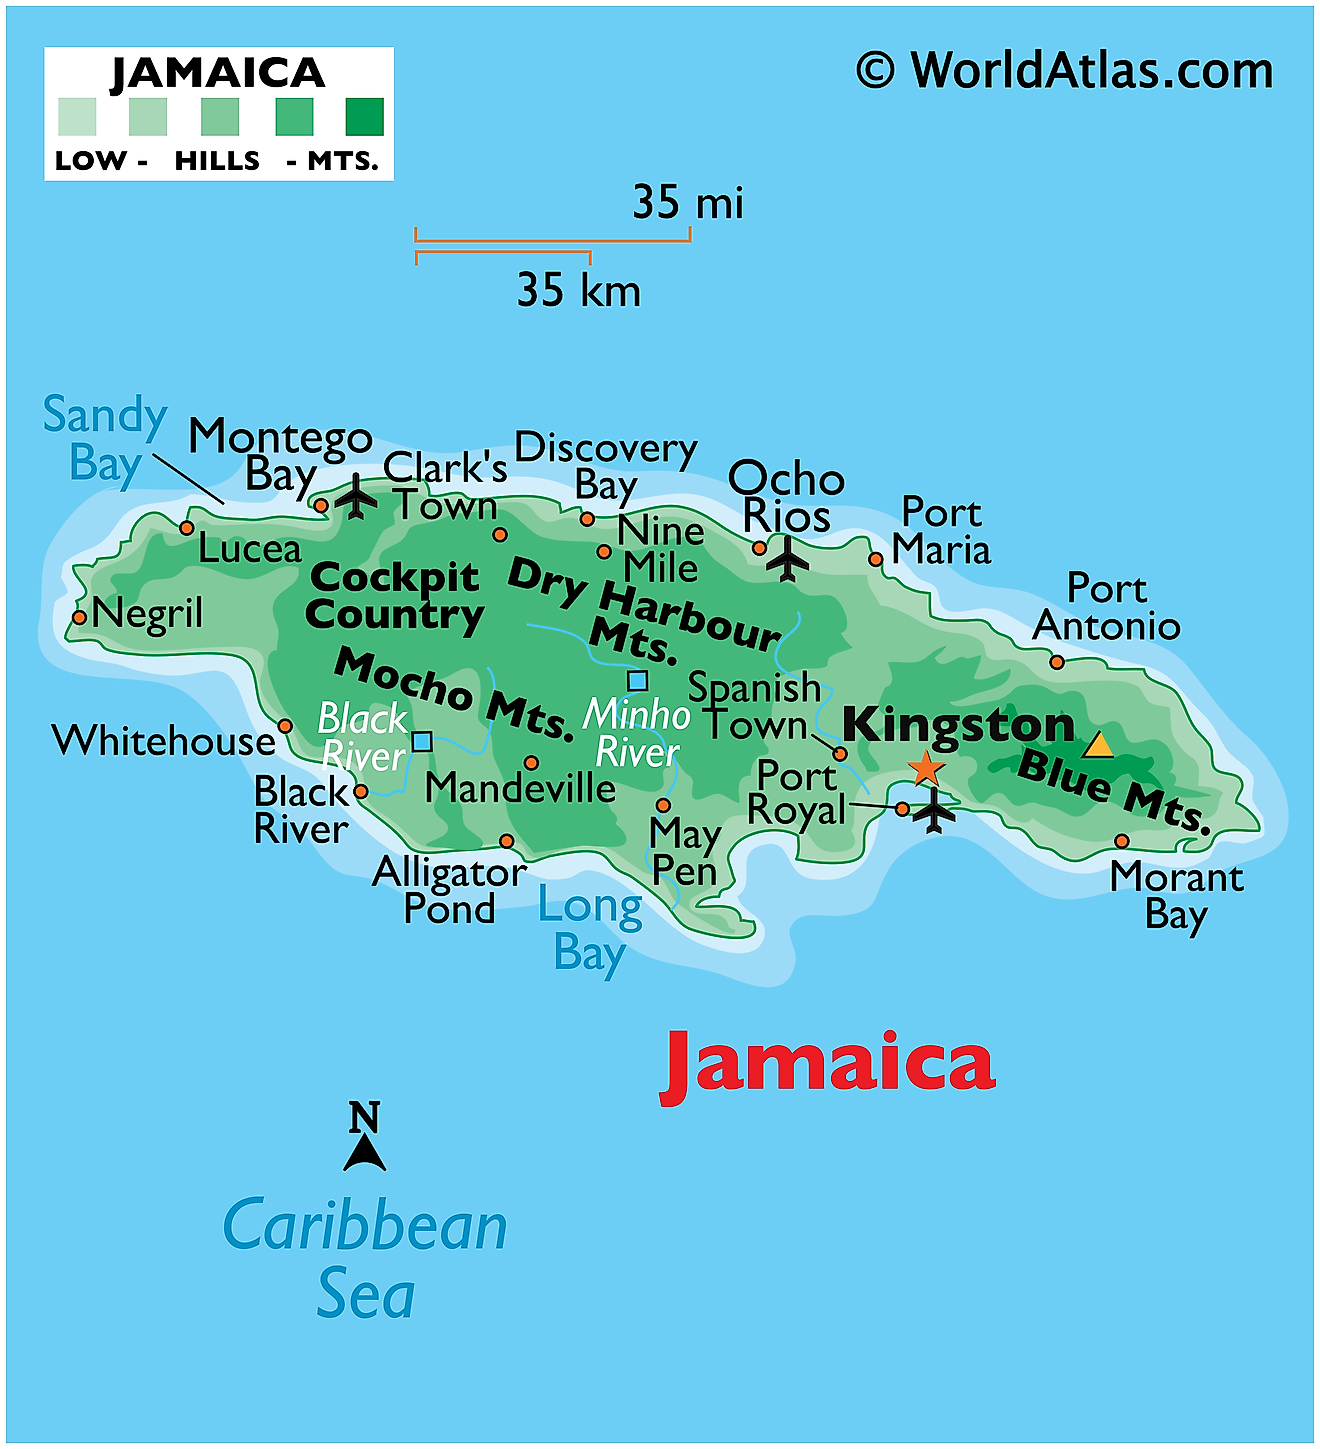 Physical Map of Jamaica showing relief, major mountain ranges, rivers ports, important settlements, and more.